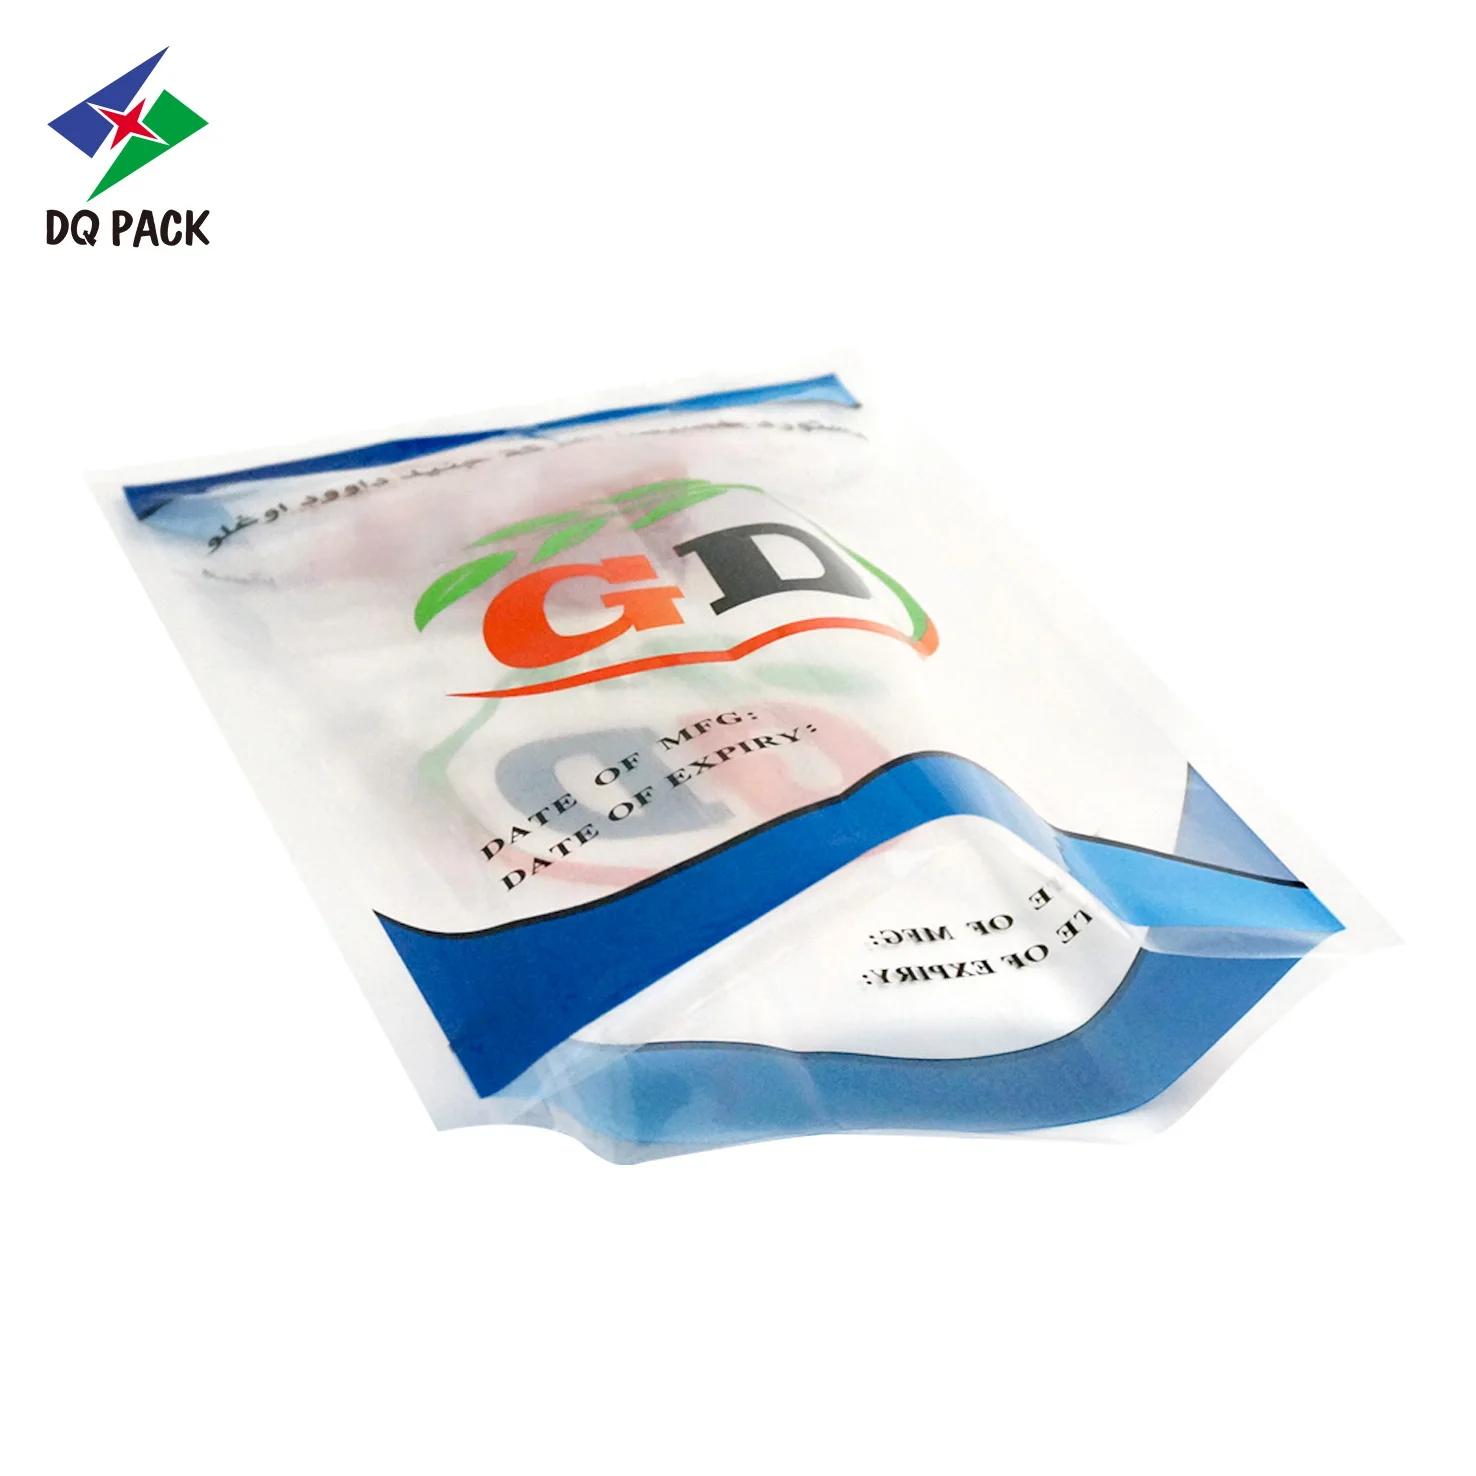 DQ PACK Flexible Food pouch Plastic Packaging Bag with zipper for food